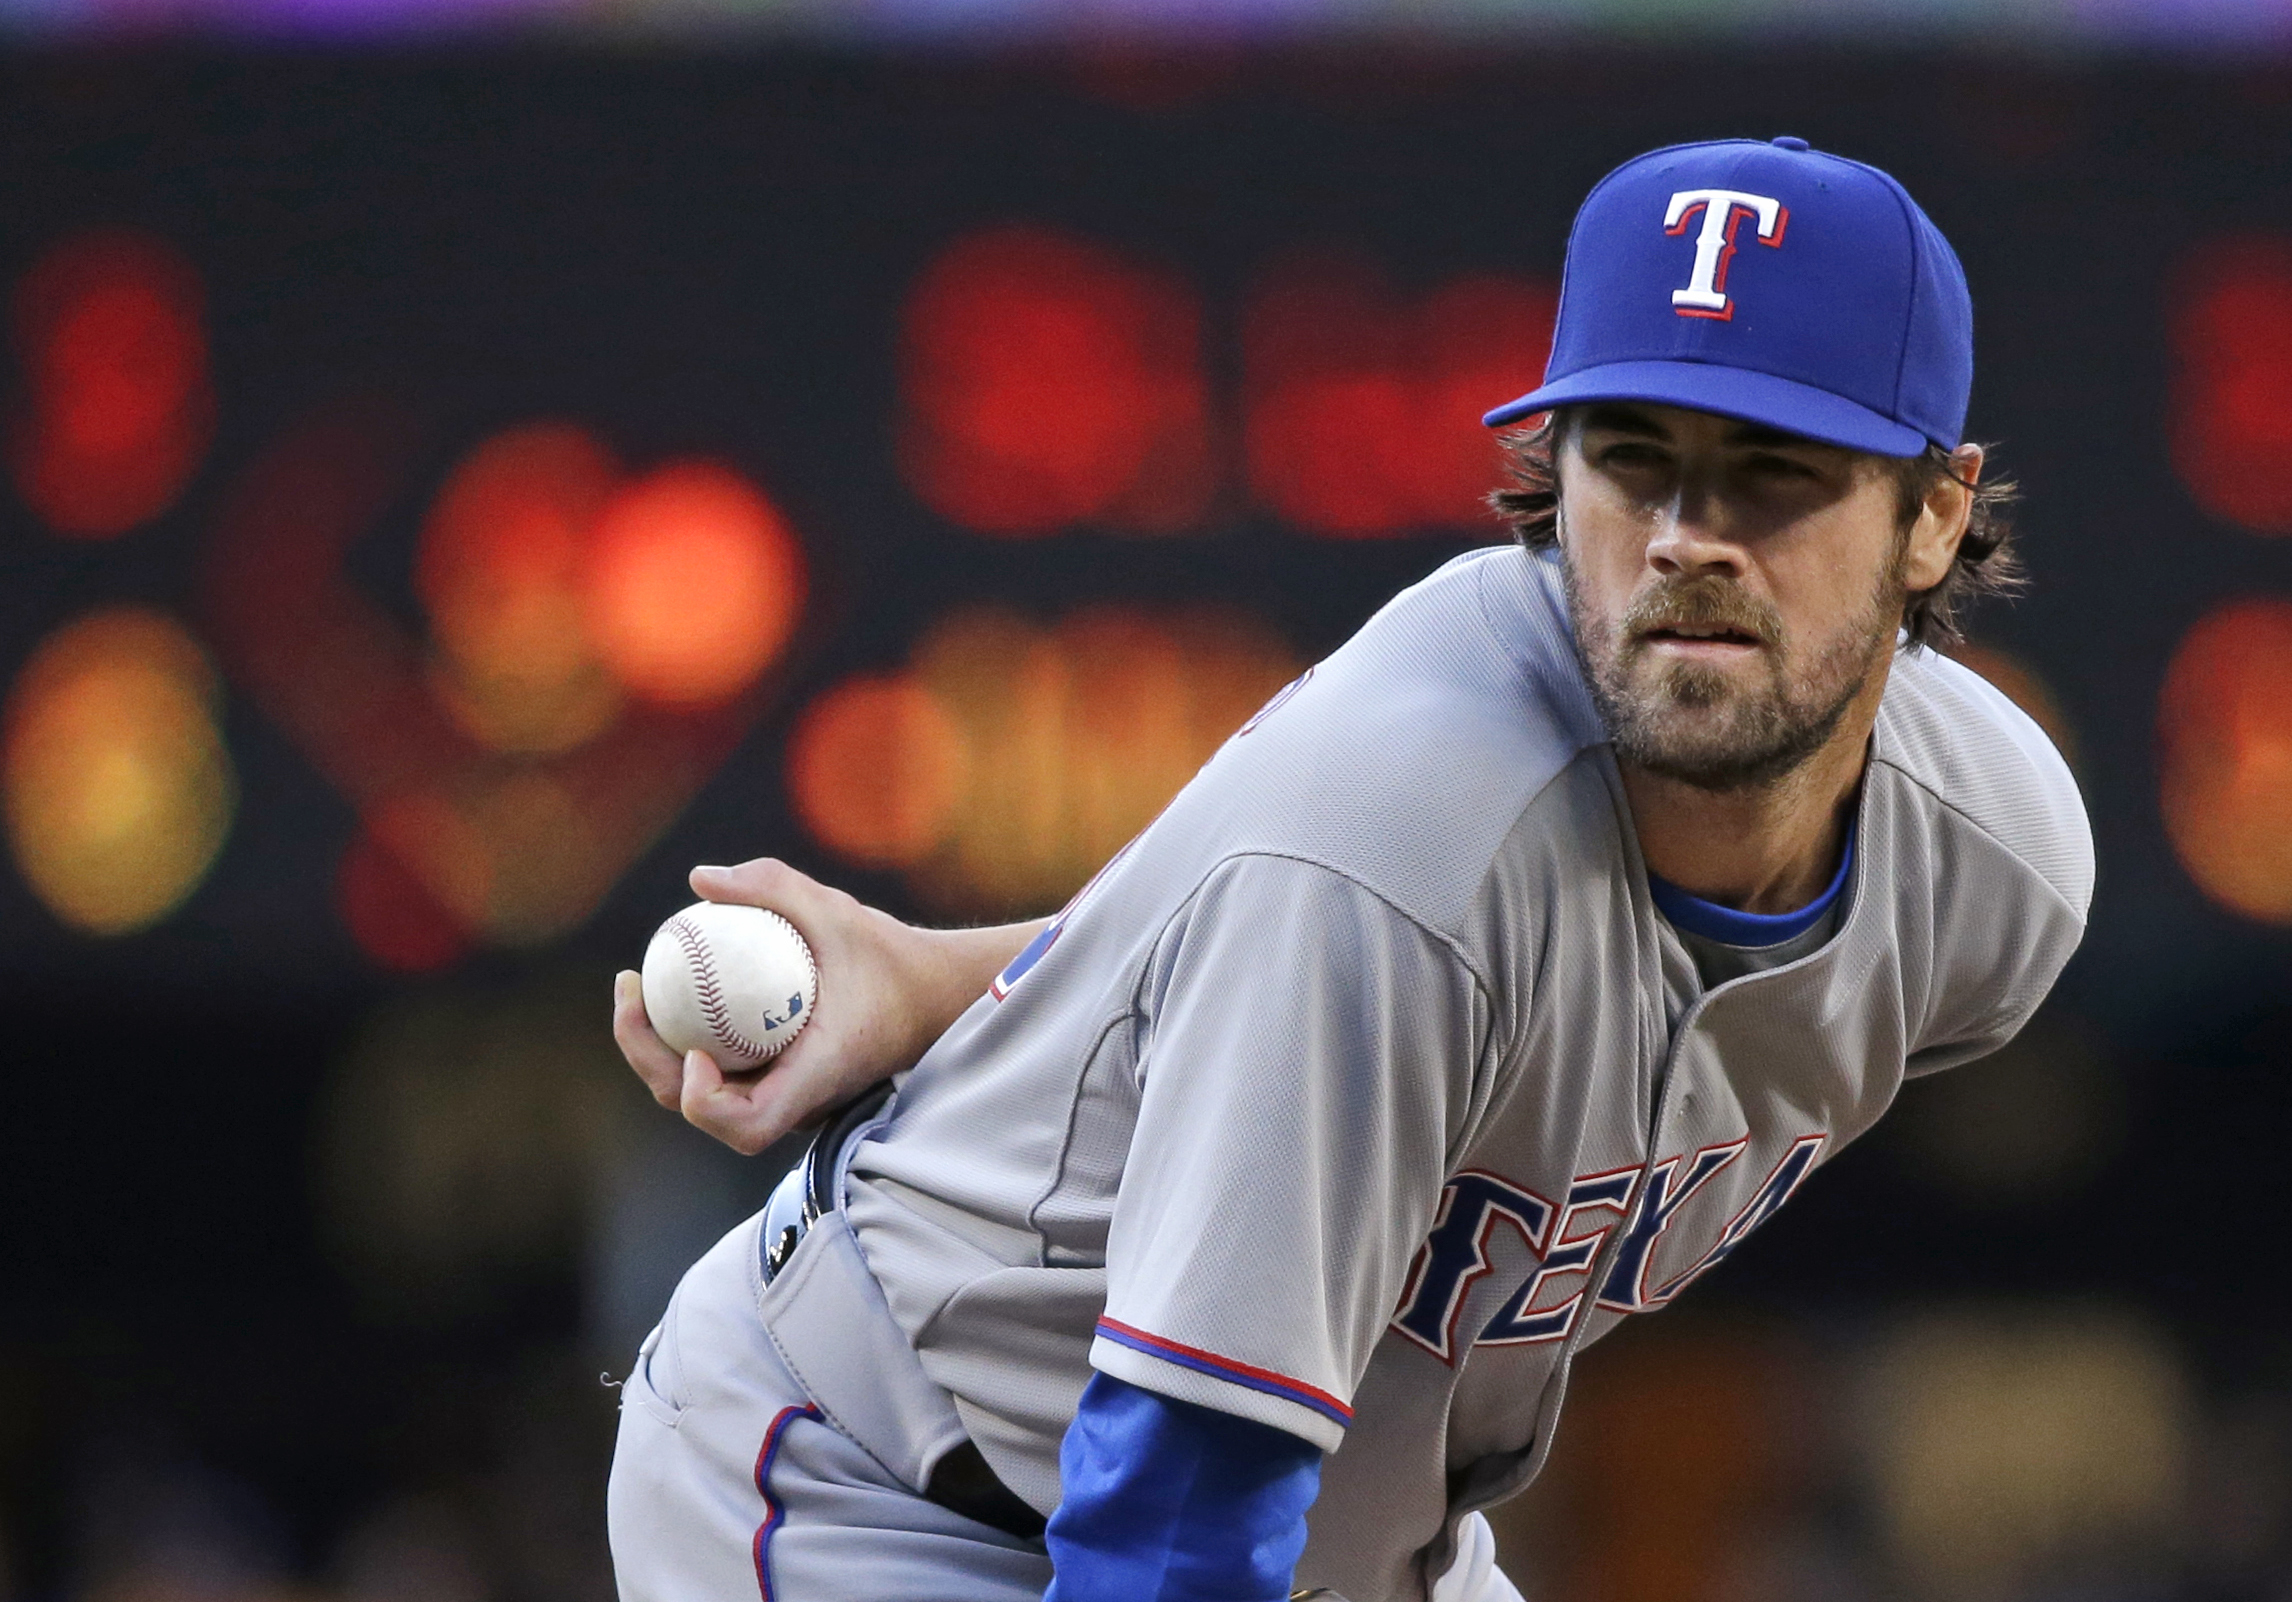 After reviewing 50 questions, Cole Hamels ranked all MLB teams